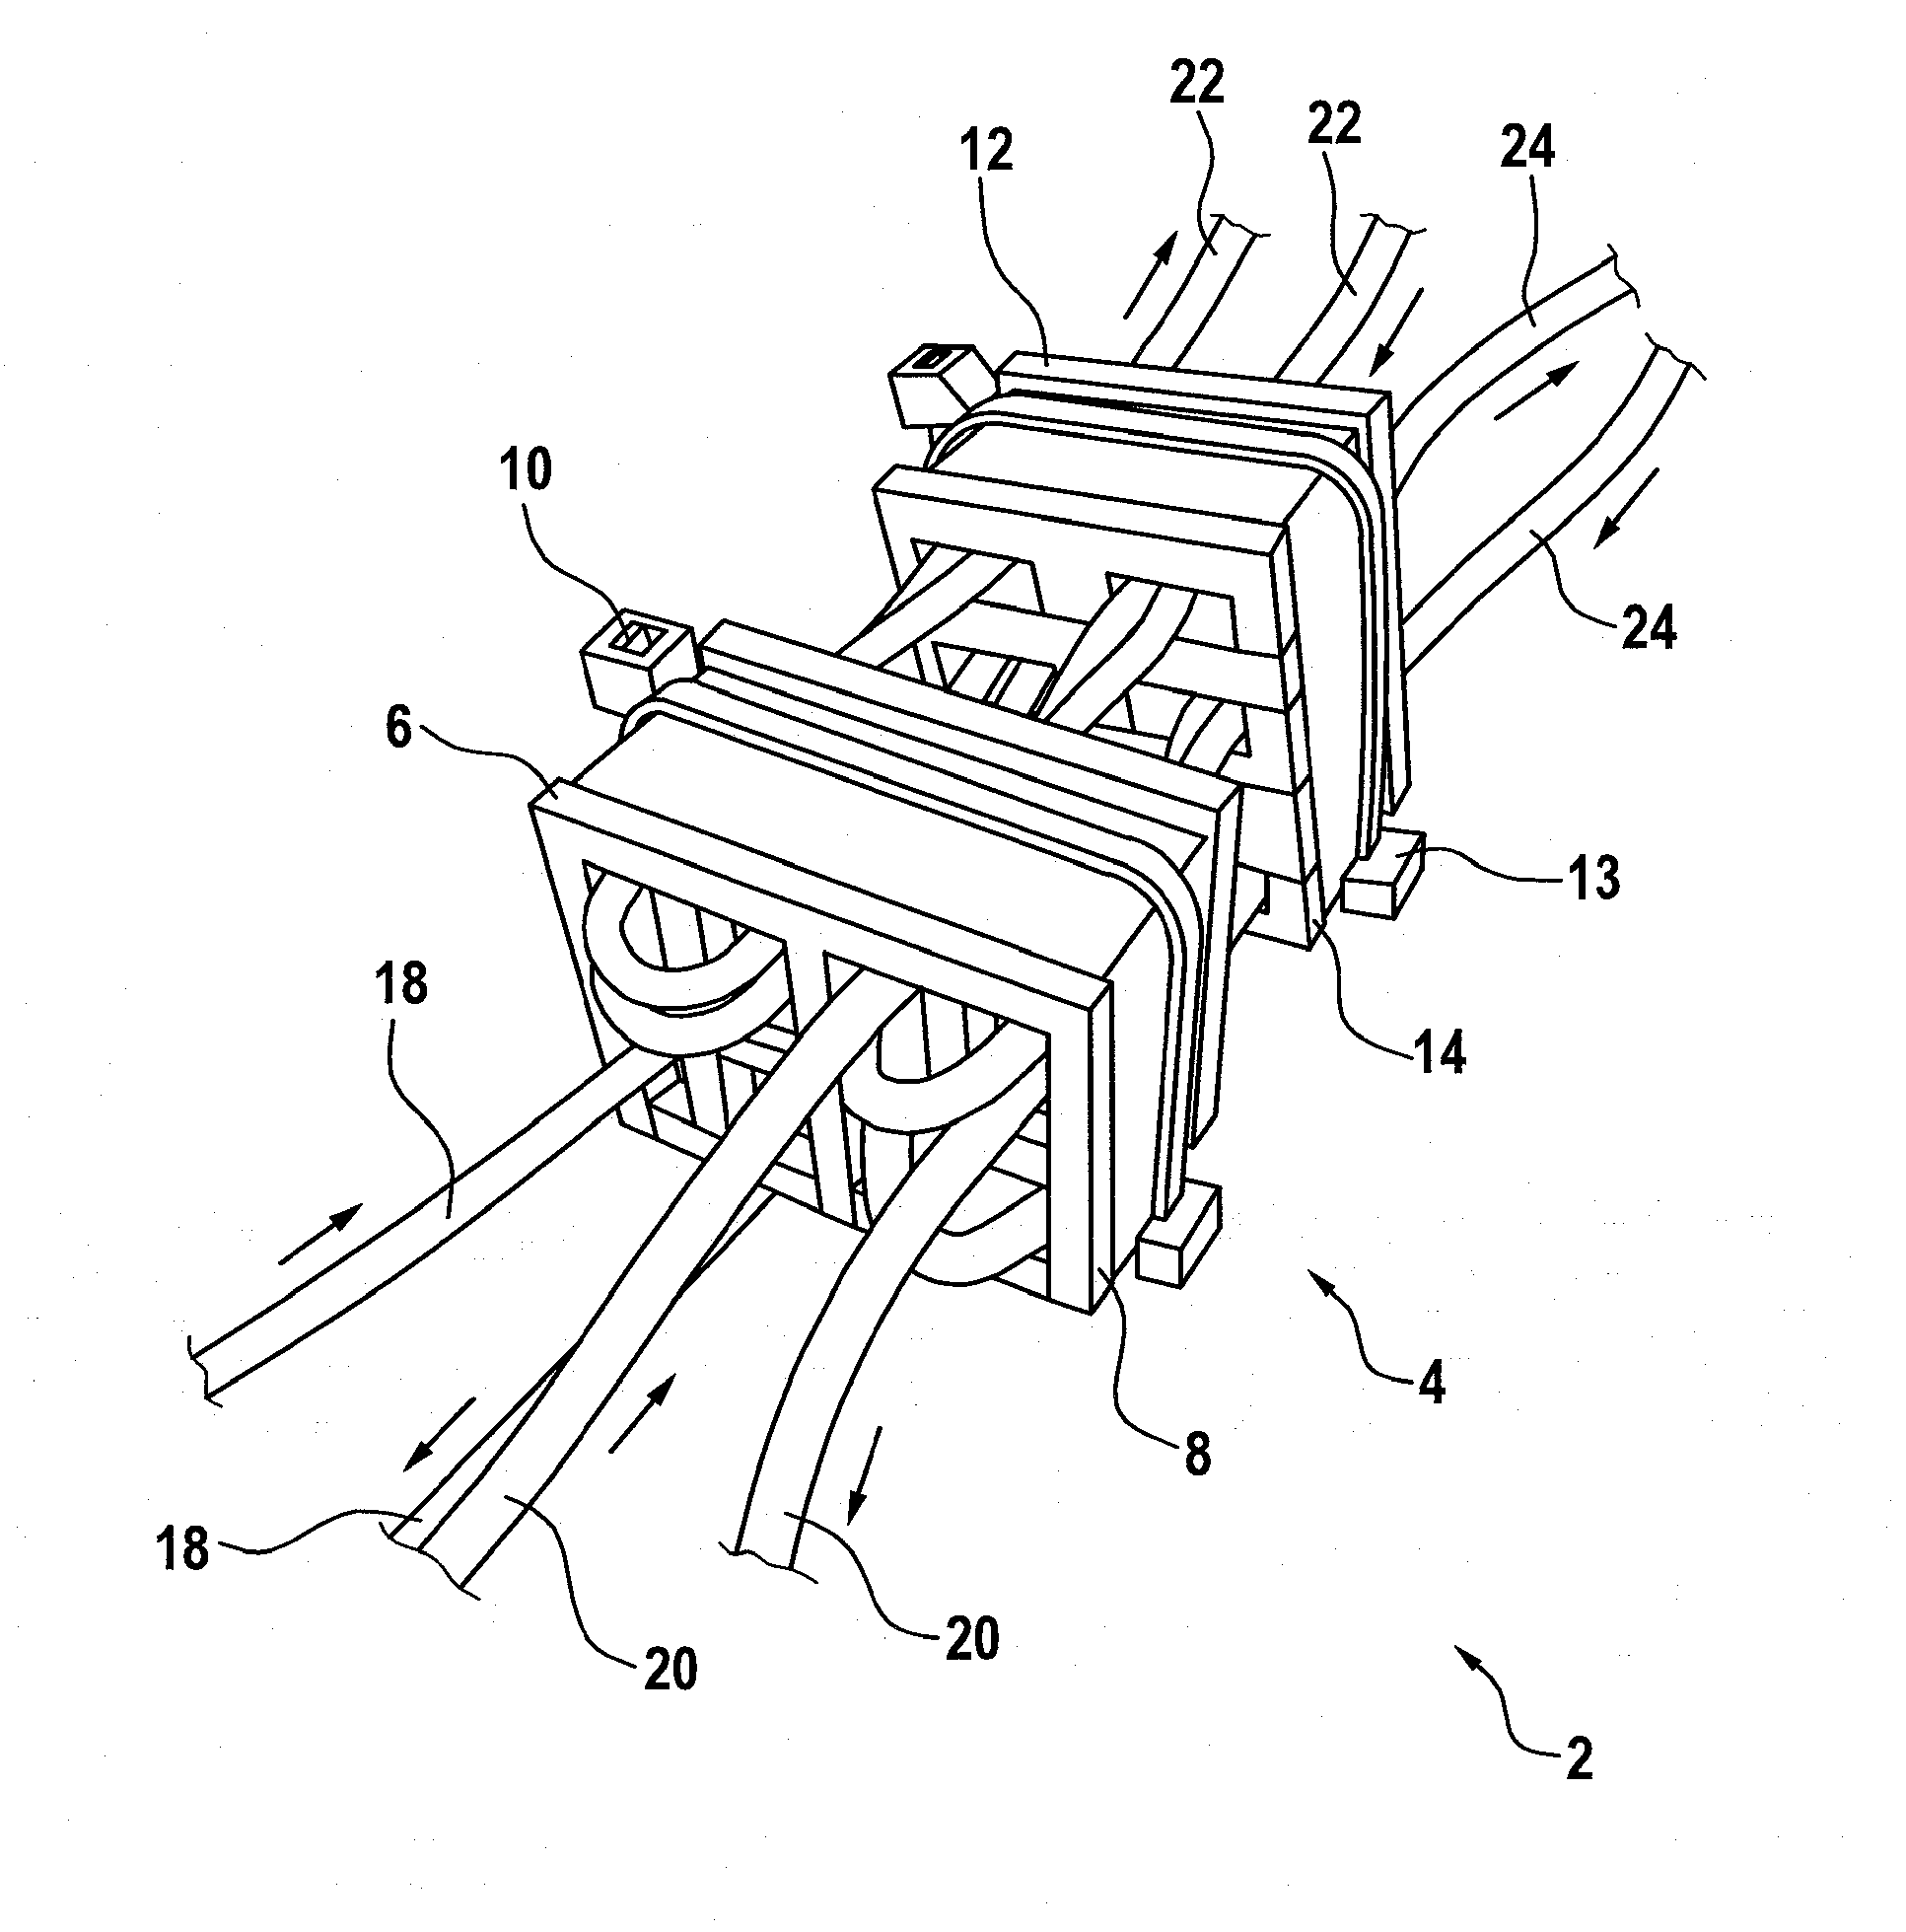 Coupling device for a multi-phase converter